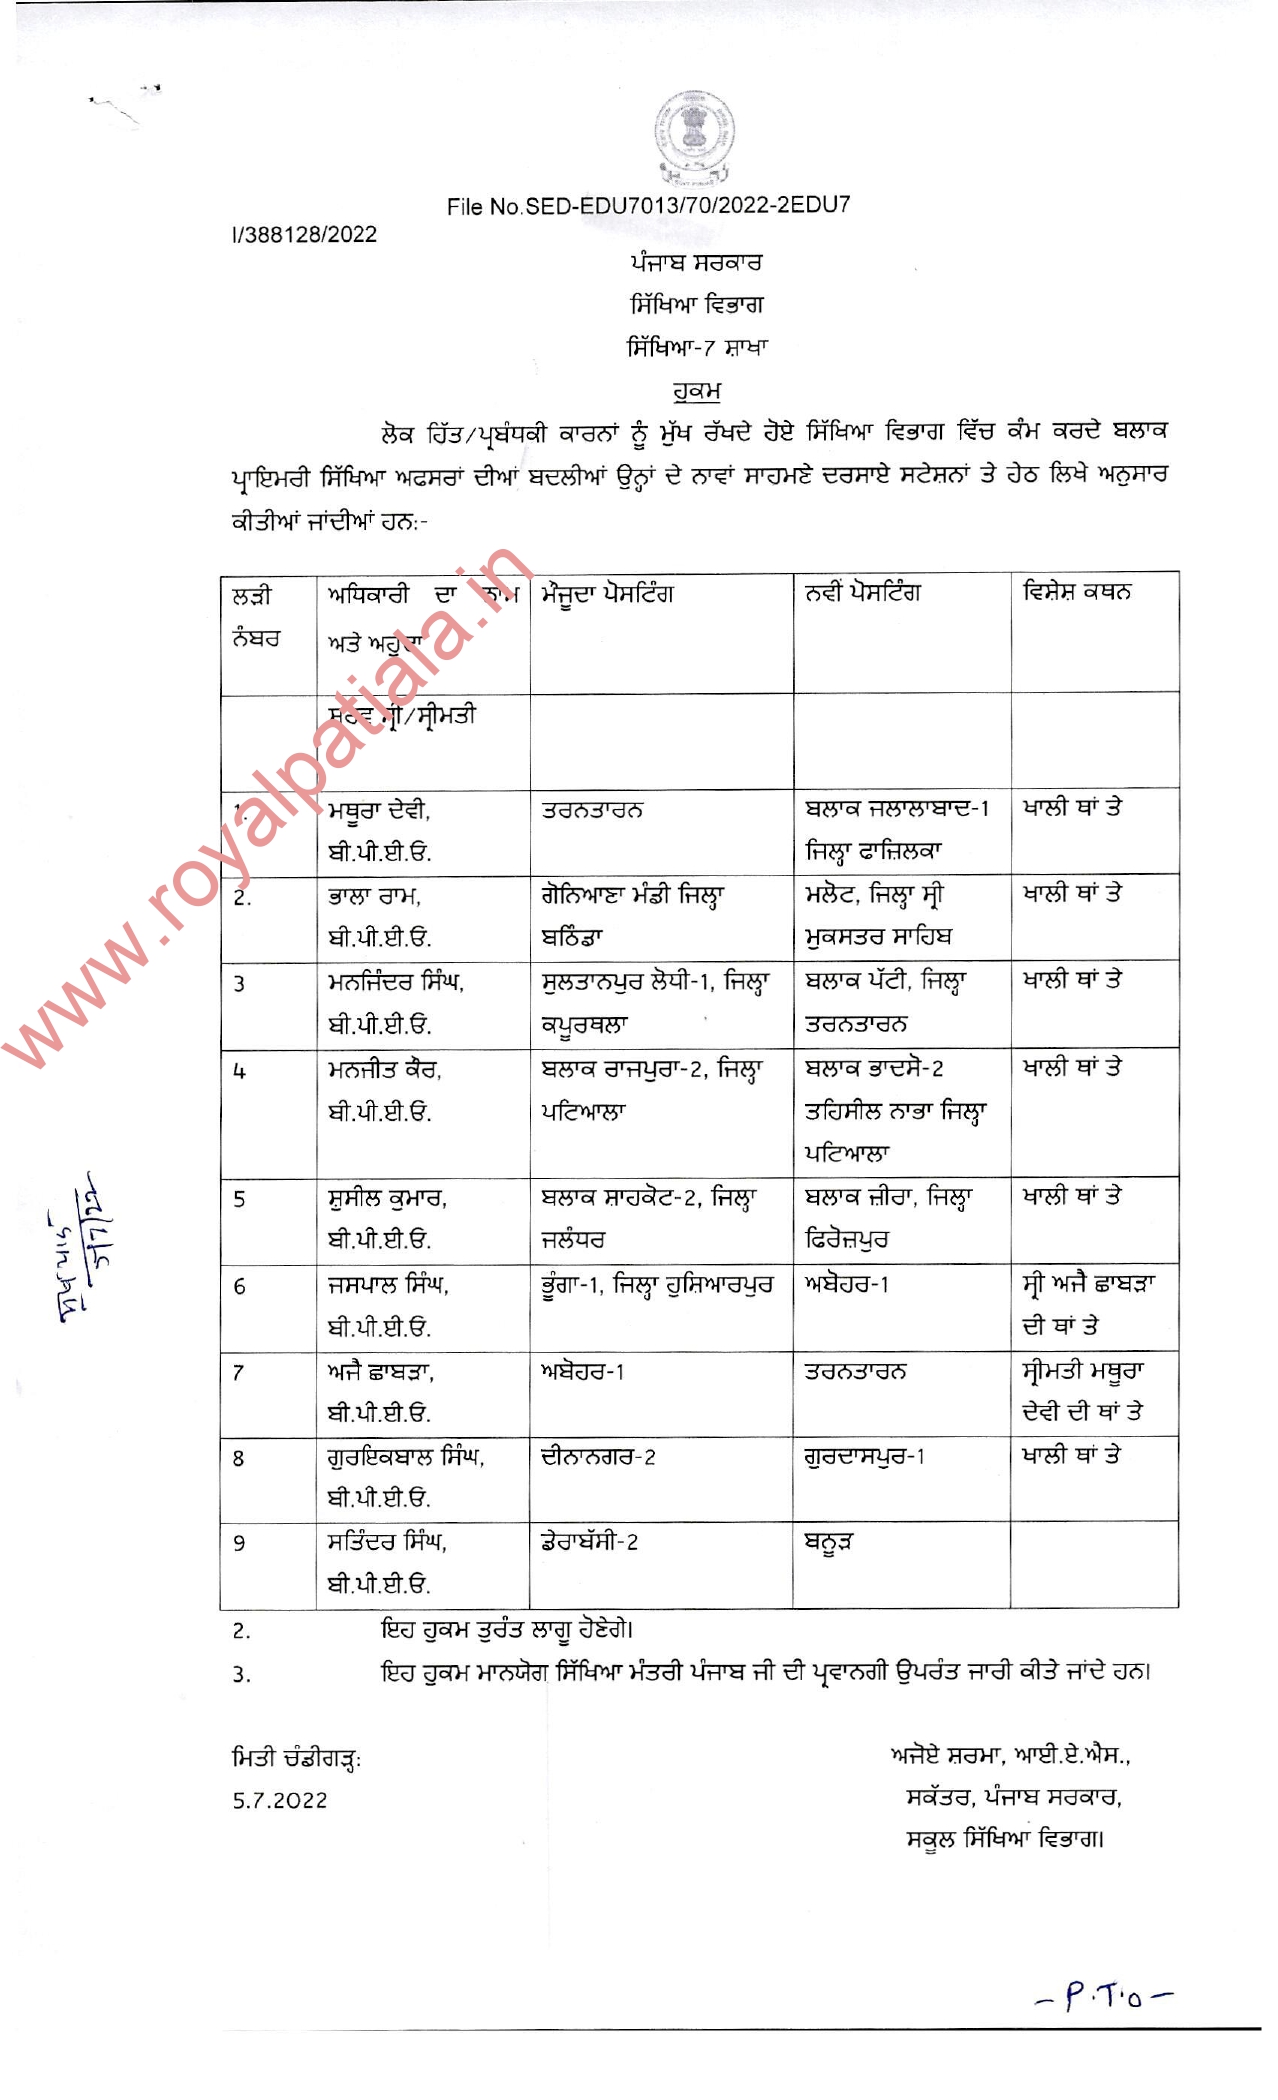 9 block primary education officers transferred in Punjab